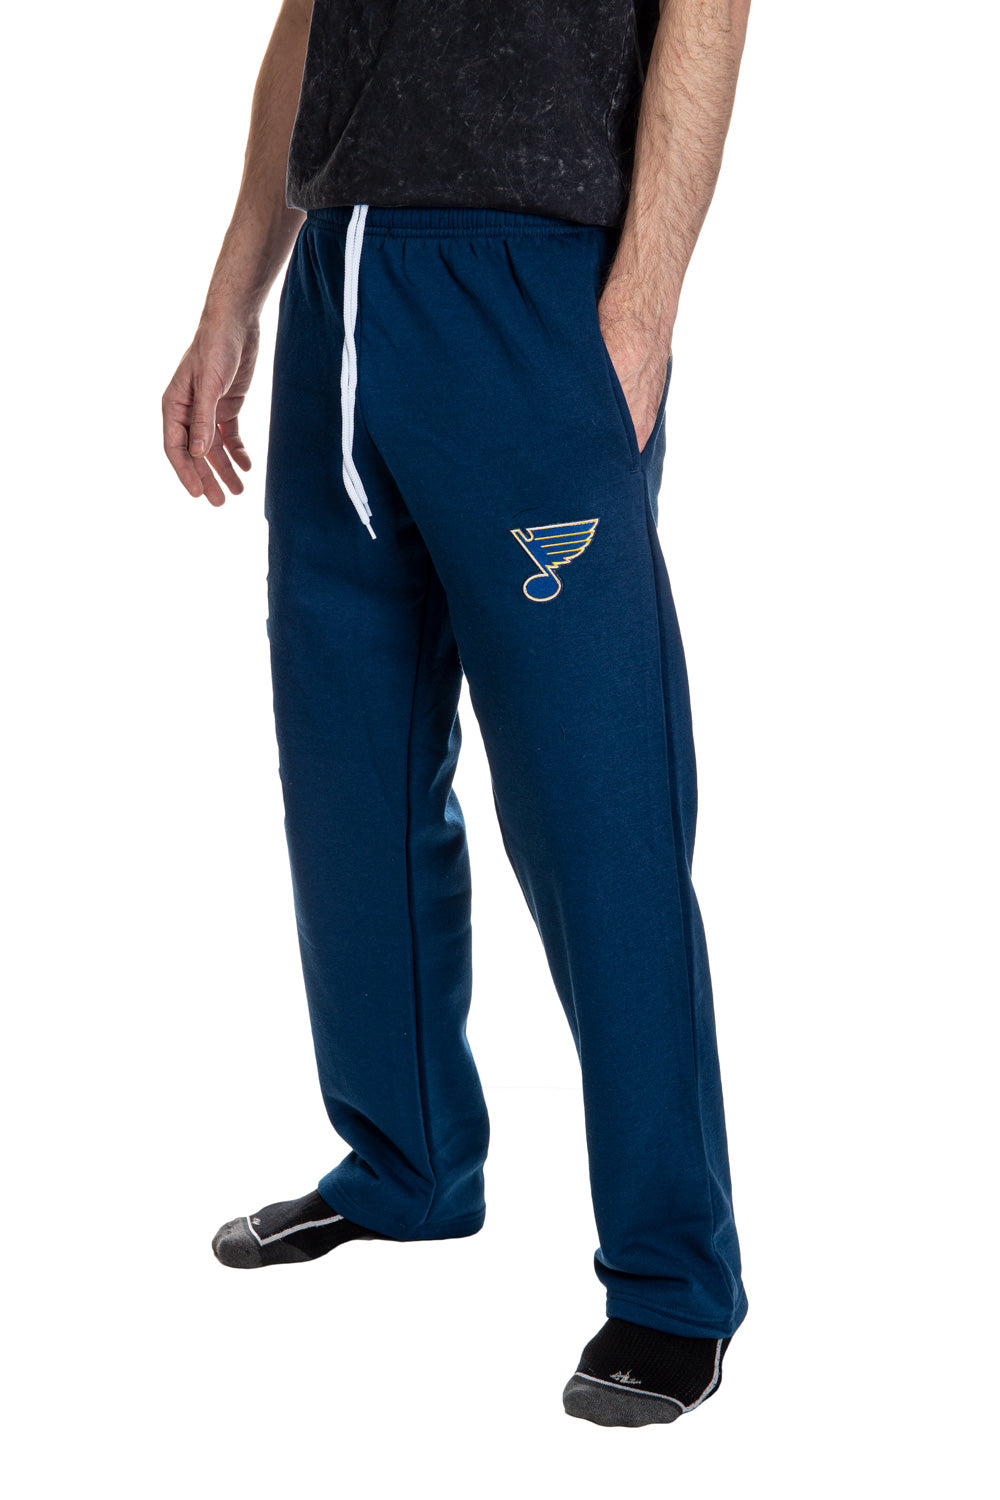 St. Louis Blue Premium Fleece Sweatpants Side View of Embroidered Logo.